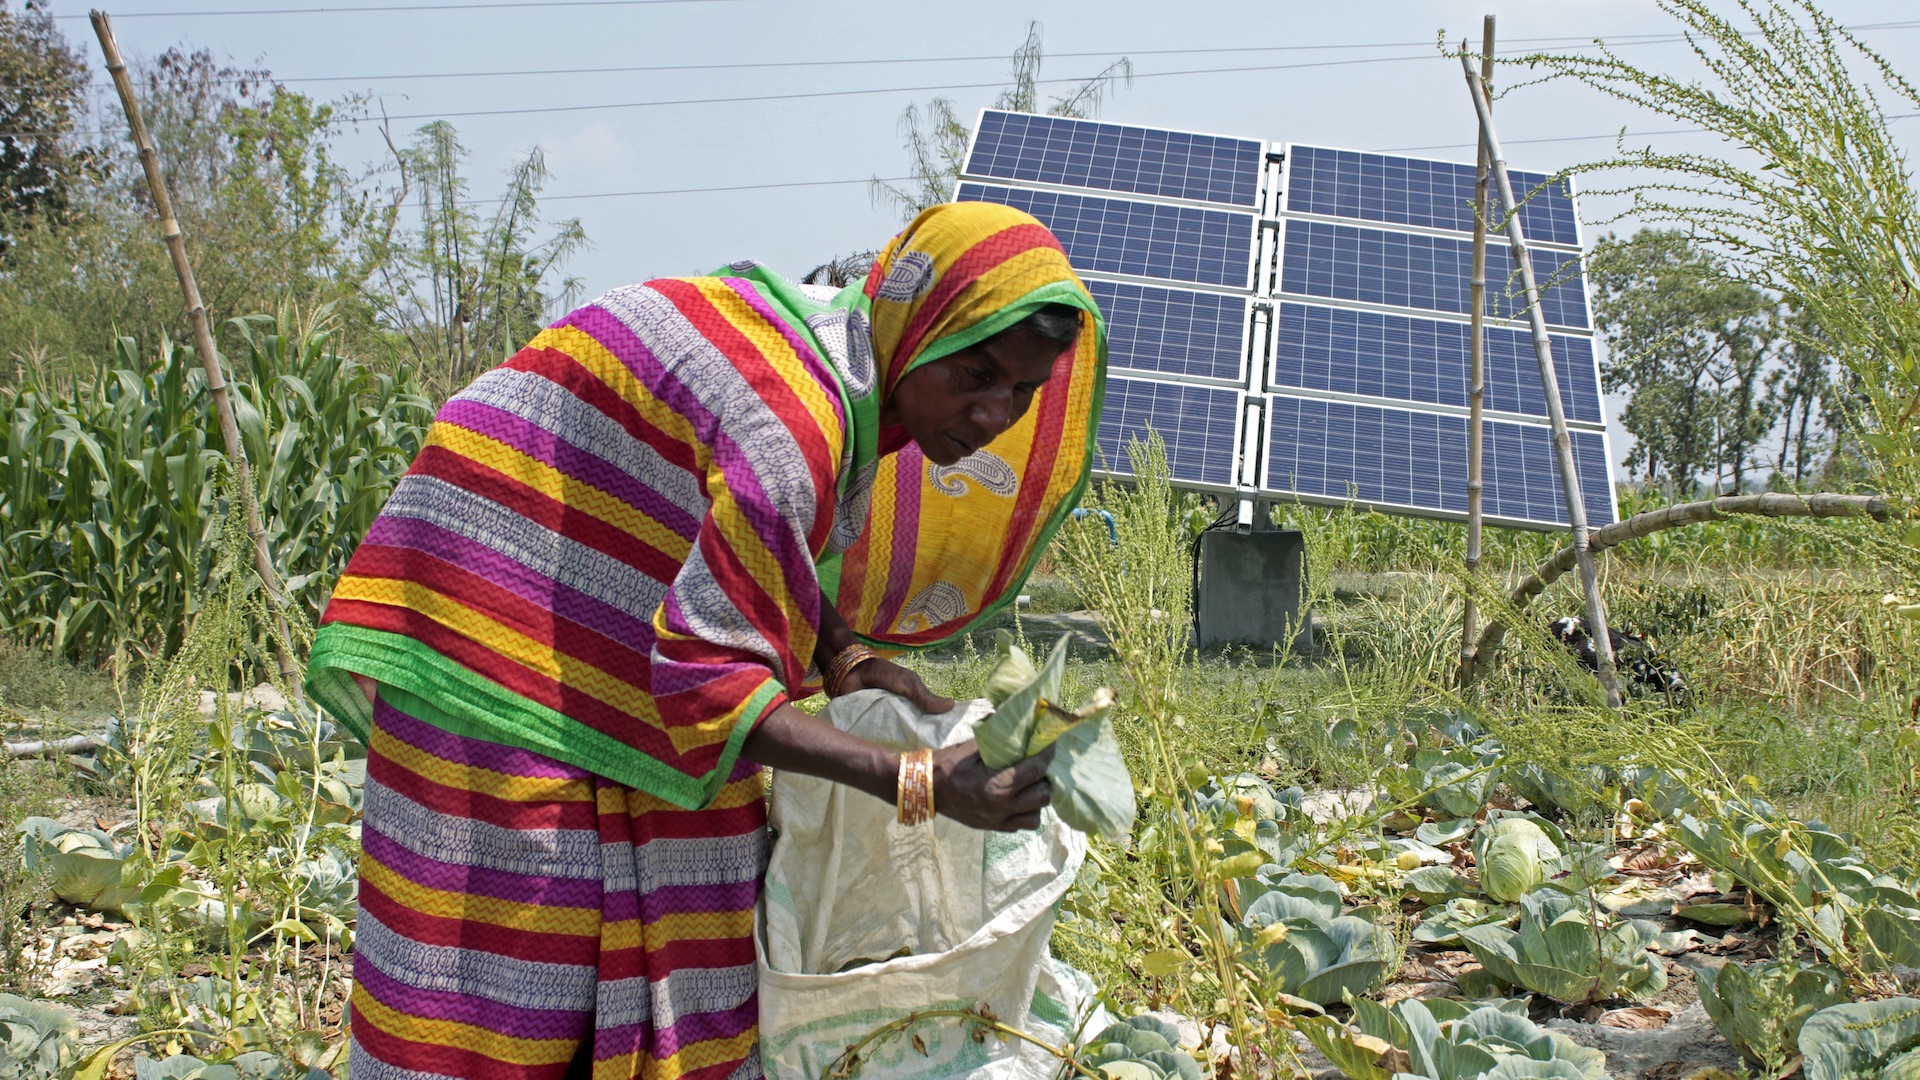 In addition to reducing carbon emissions, climate solutions like Conservation Agriculture, Nutrient Management, and Distributed Solar Photovoltaics can be combined to improve people’s food security, access to water and electricity, and income.